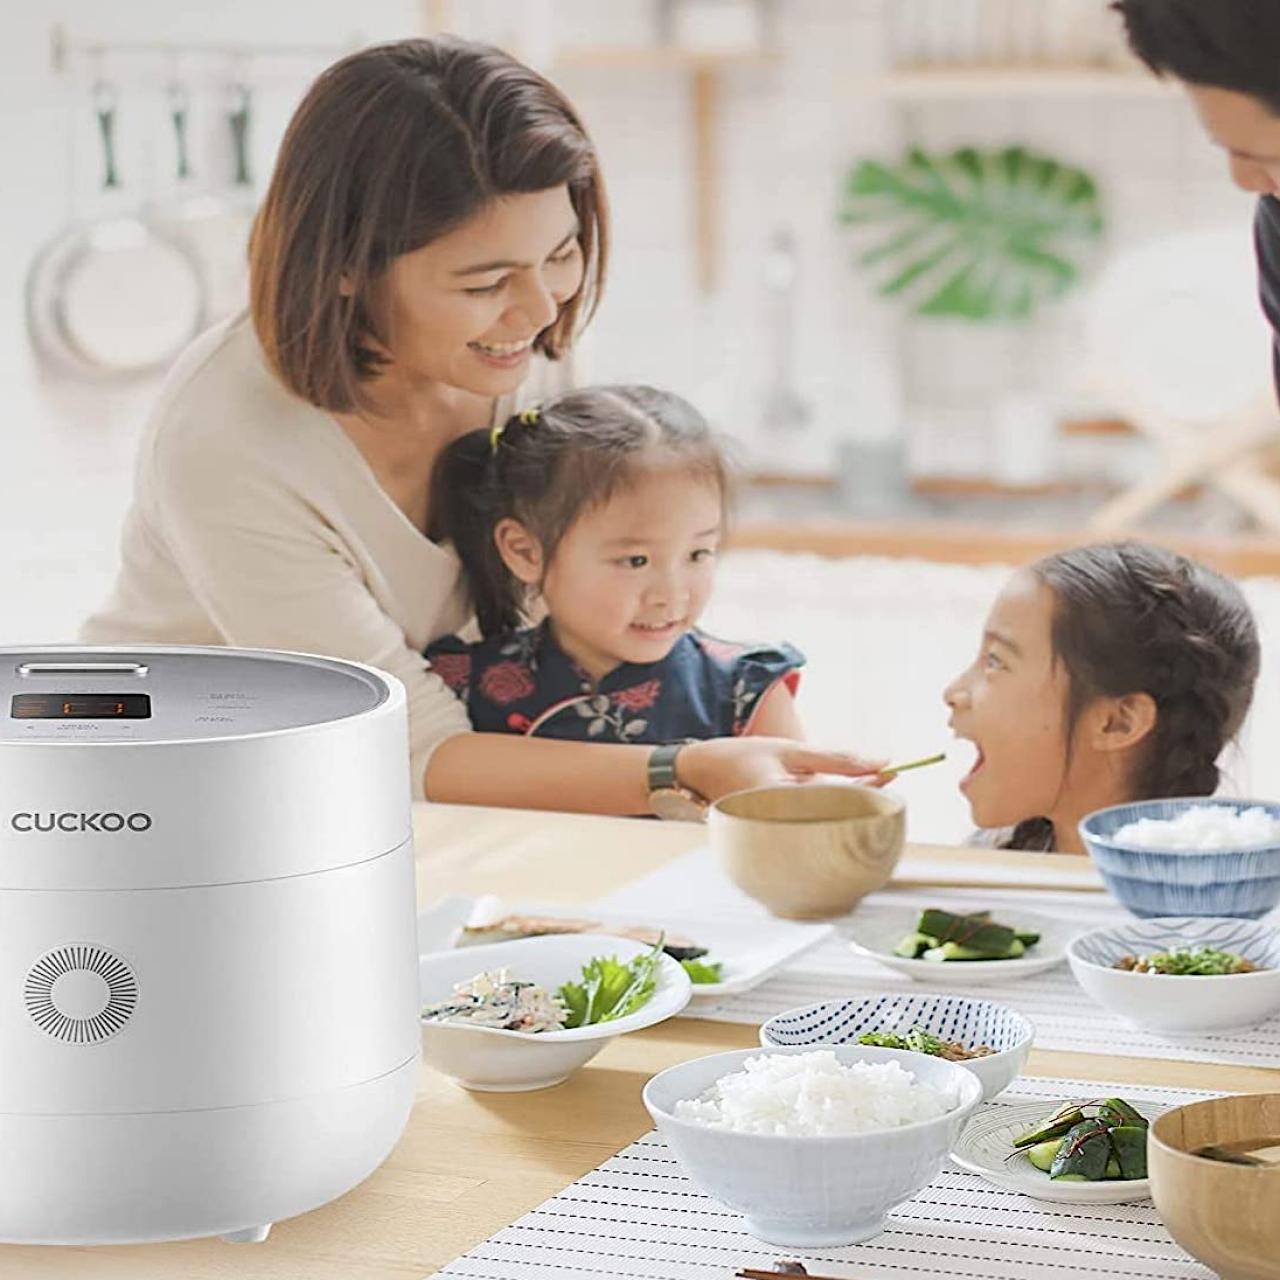 If you're into making rice bowls, this $25 mini rice cooker makes